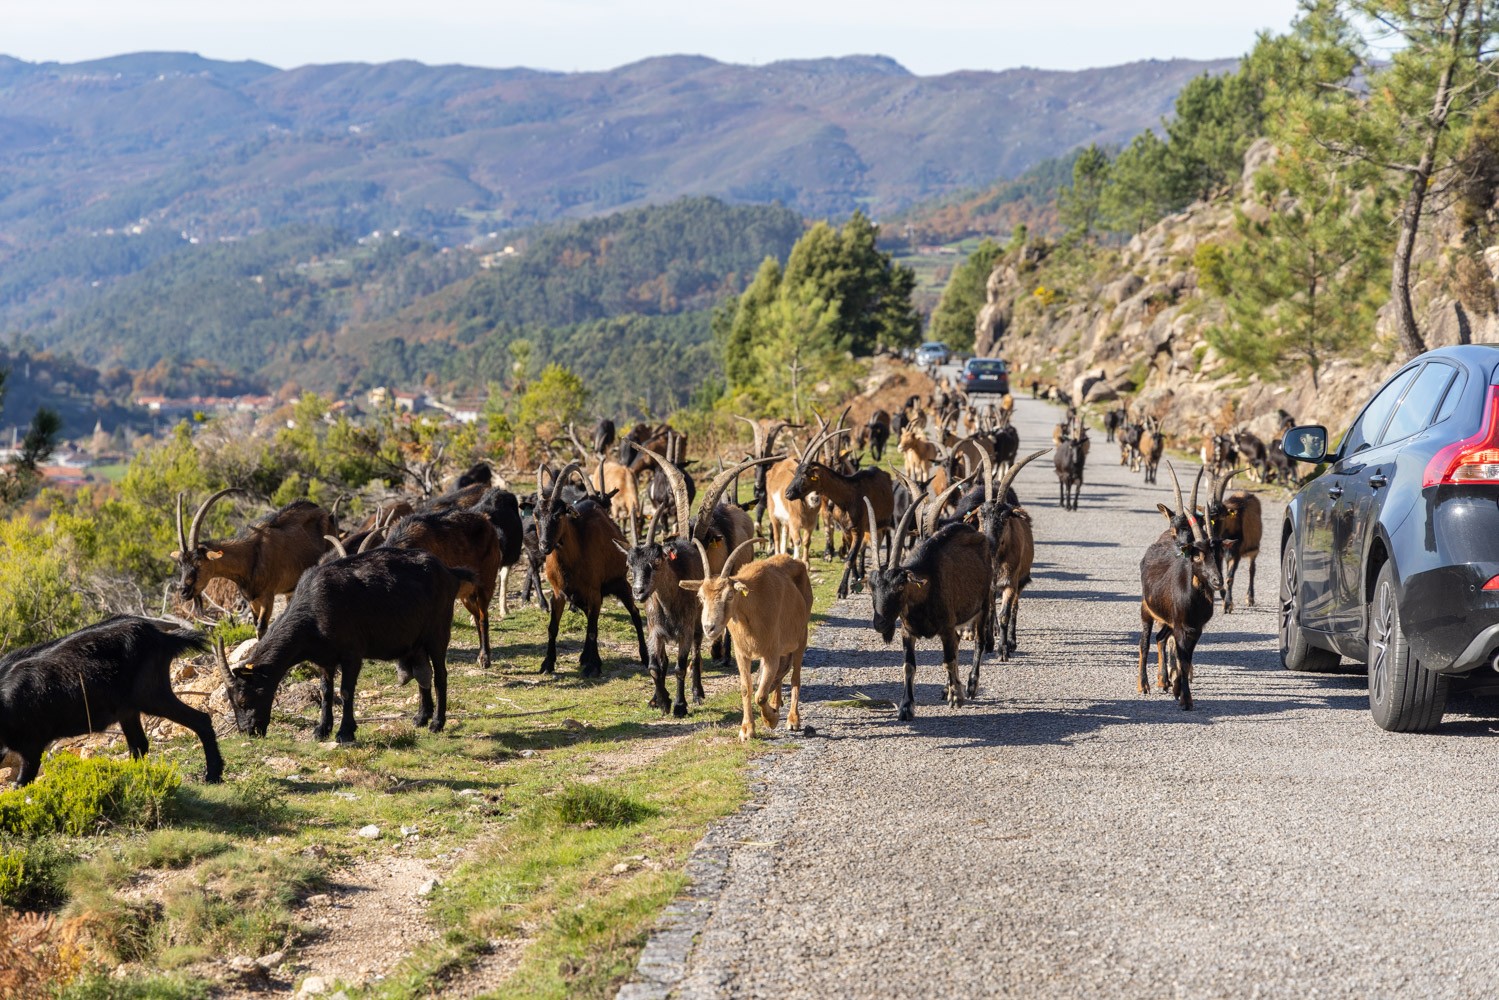 Goats on the road in Geres national park